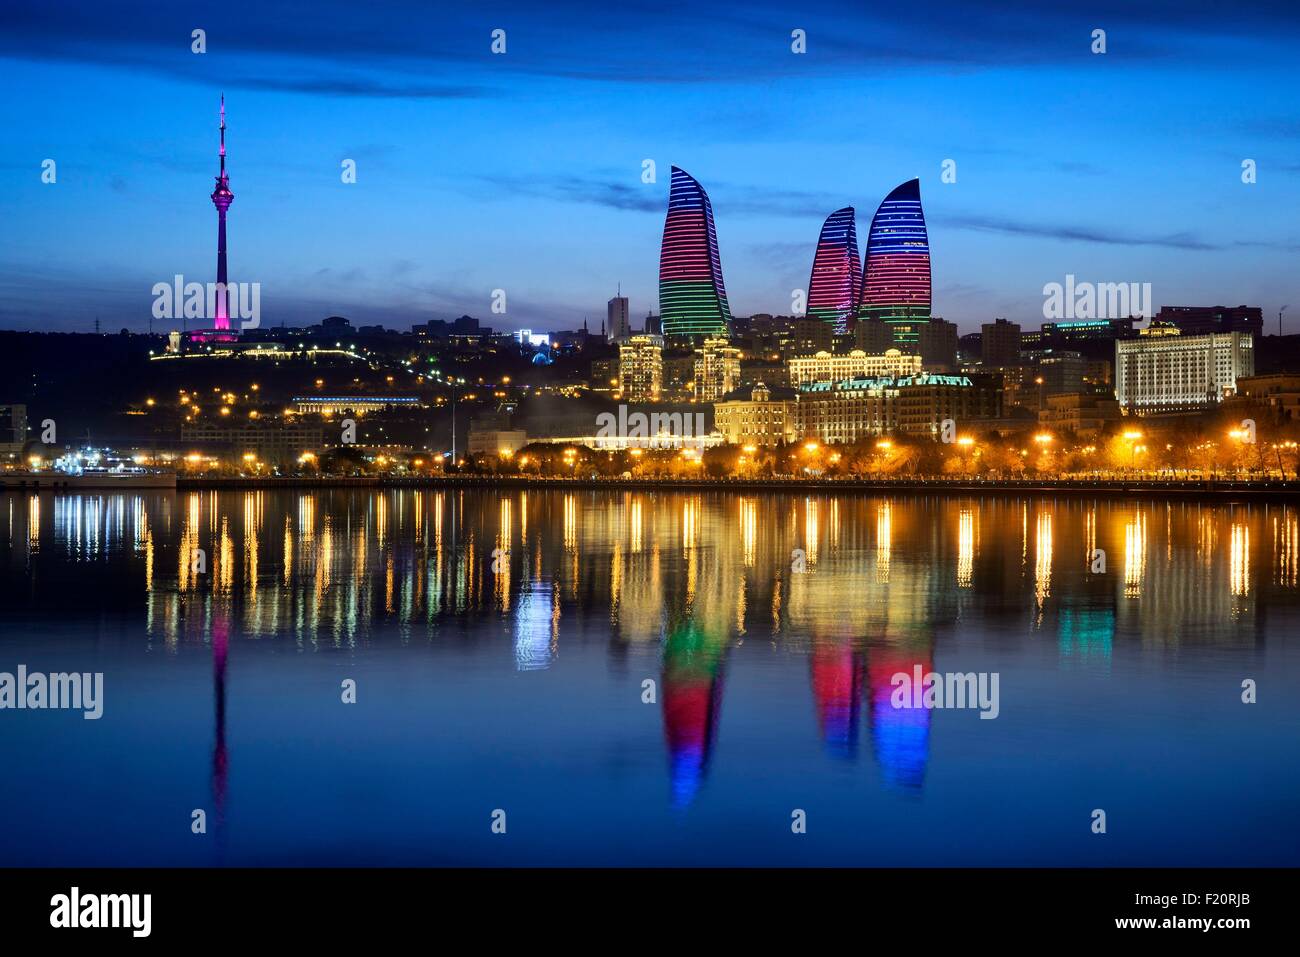 Azerbaijan, Baku, Baku Bulvar (Boulevard), city illuminated at dusk reflected in the Caspian sea, the Flame Towers with the colours of the national flag and the TV Tower Stock Photo